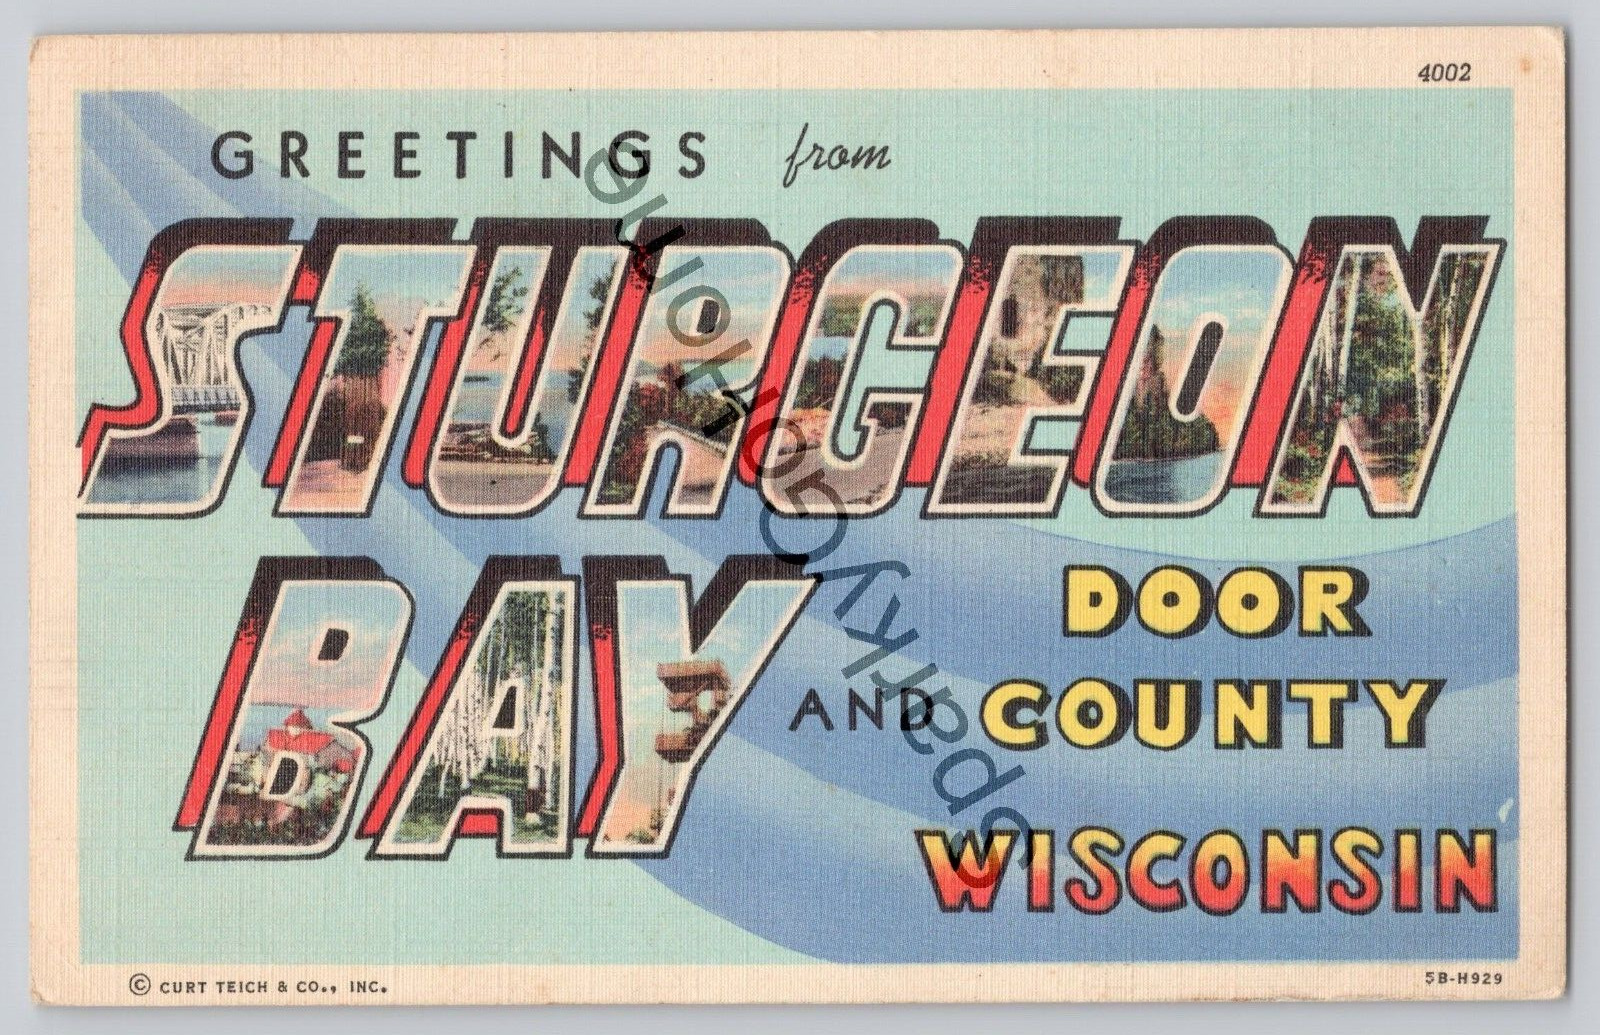 GREETINGS FROM Sturgeon Bay and Door County Wisconsin Posted 1947